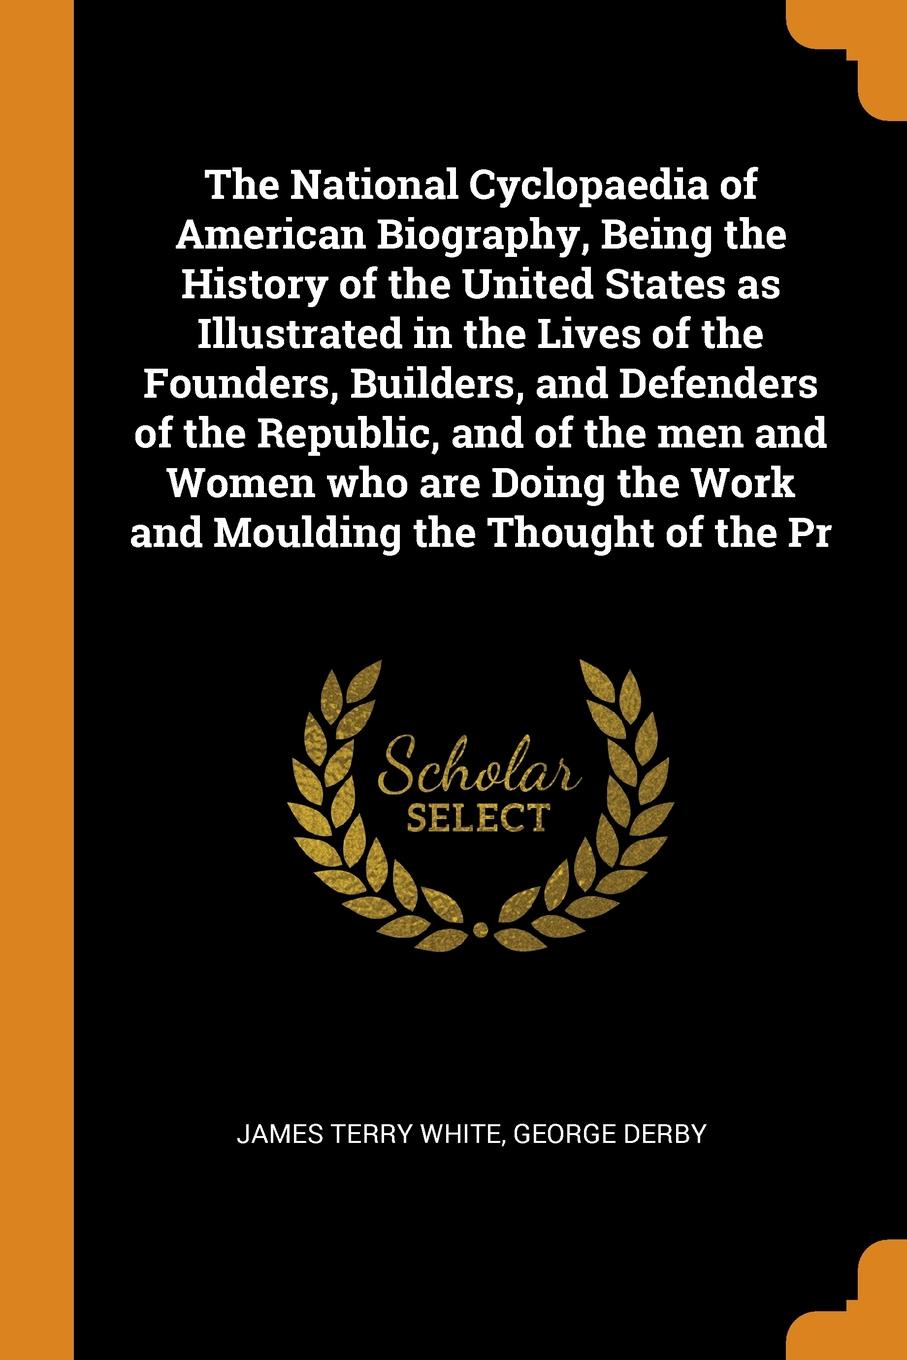 The National Cyclopaedia of American Biography, Being the History of the United States as Illustrated in the Lives of the Founders, Builders, and Defenders of the Republic, and of the men and Women who are Doing the Work and Moulding the Thought o...